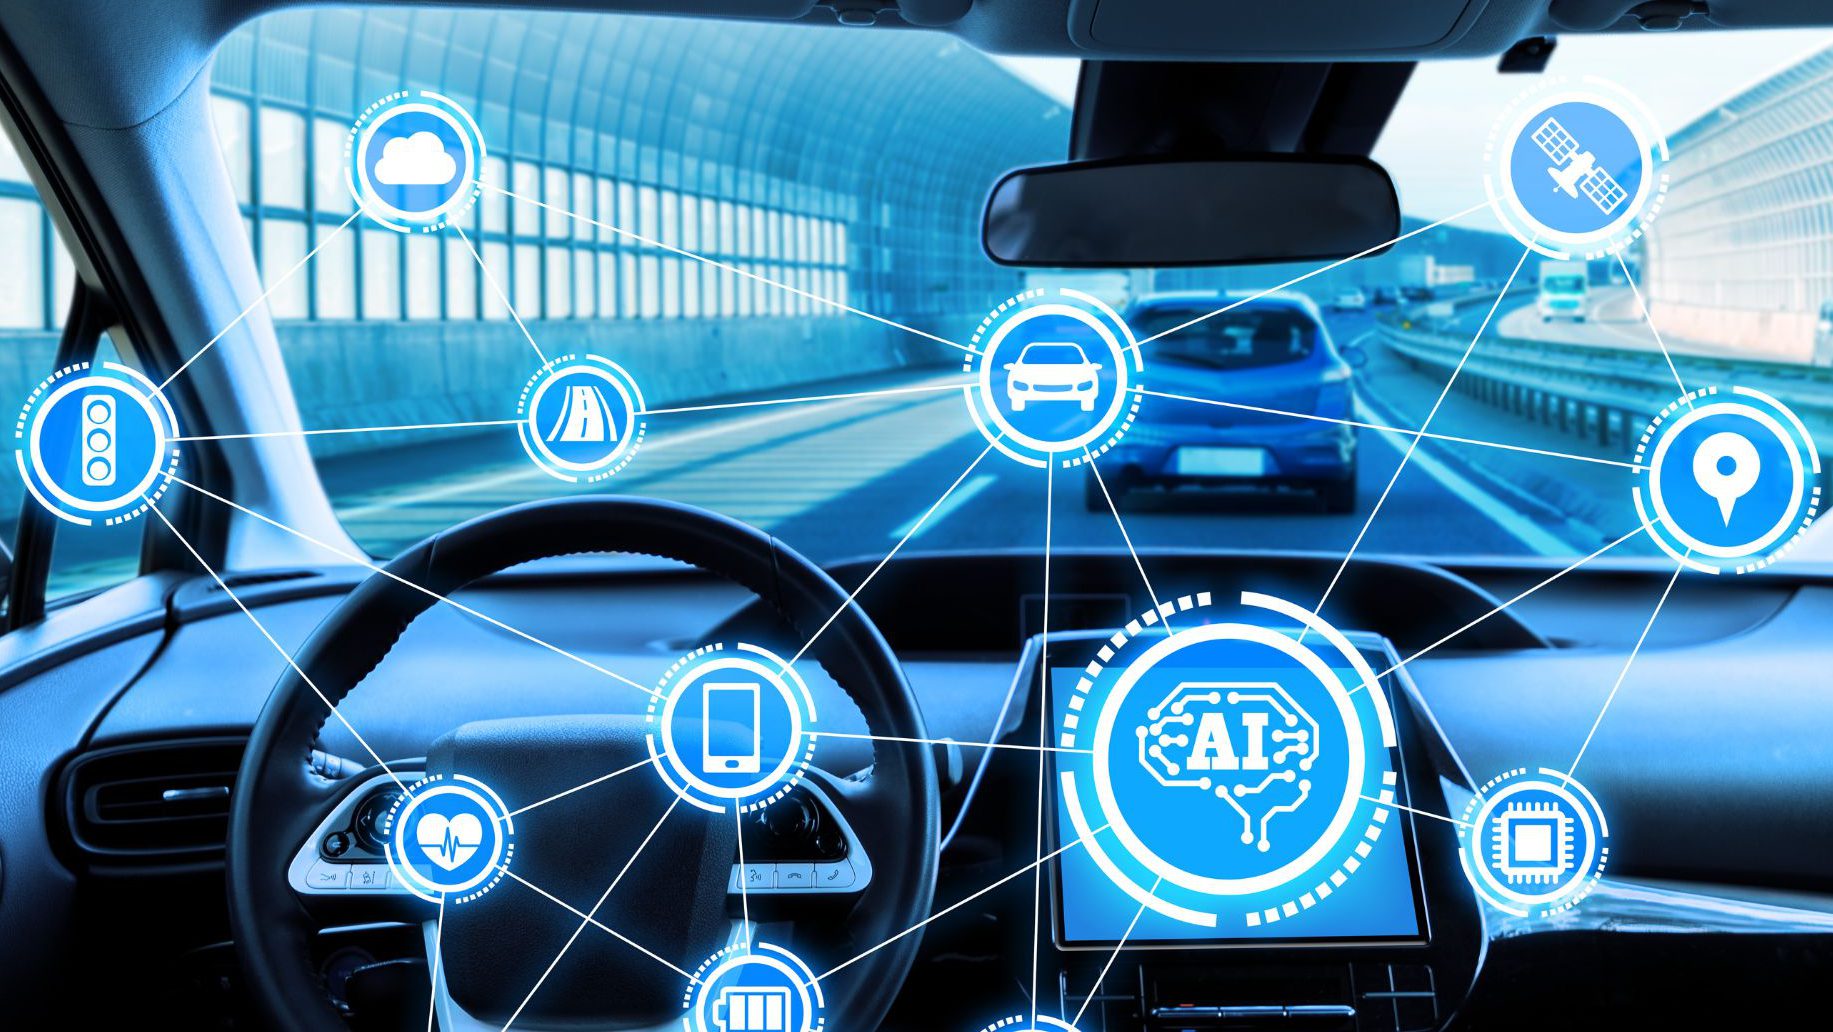 Global Vehicle Analytics Market Overview And Prospects – Includes Vehicle Analytics Market Share